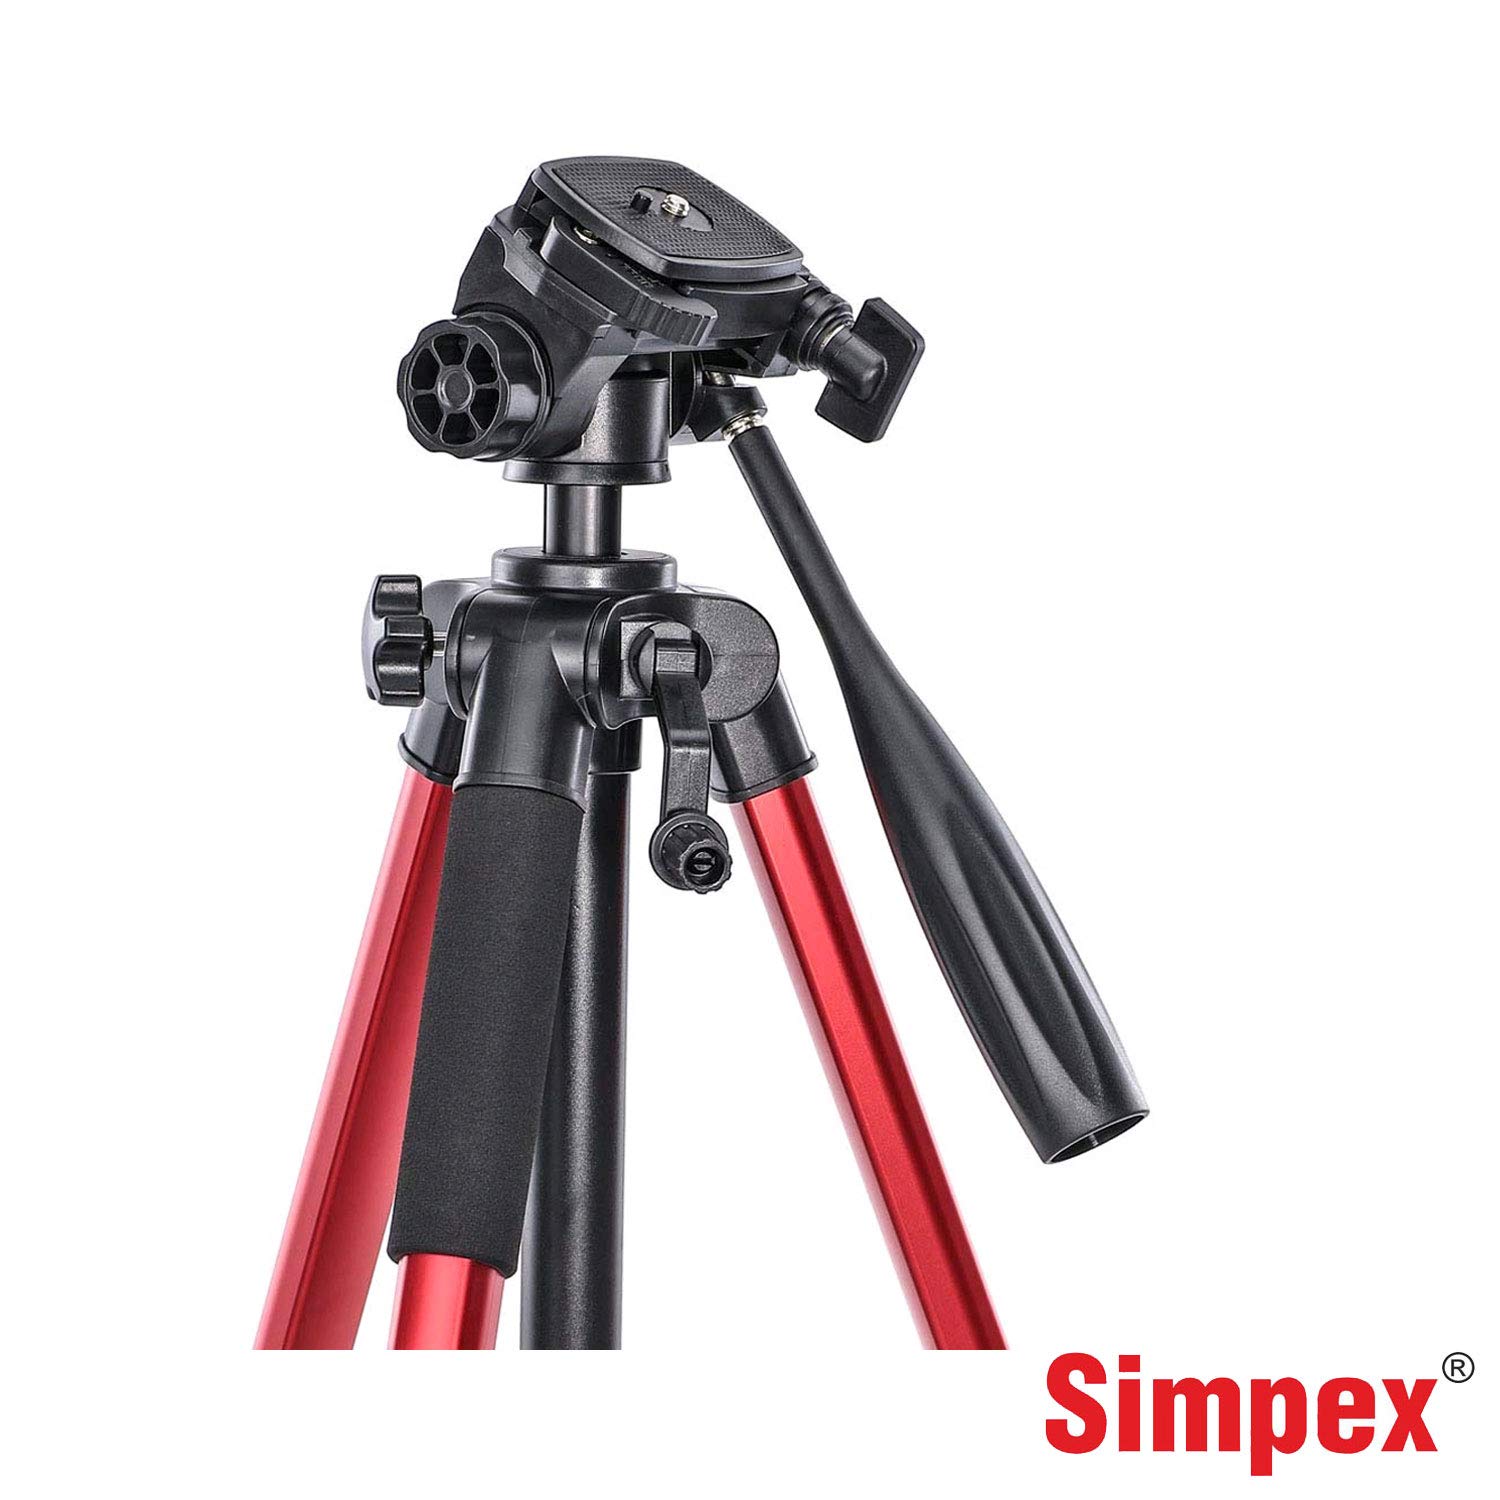 Simpex Tripod C-606 - Professional Tripod with Carry Bag (Red)